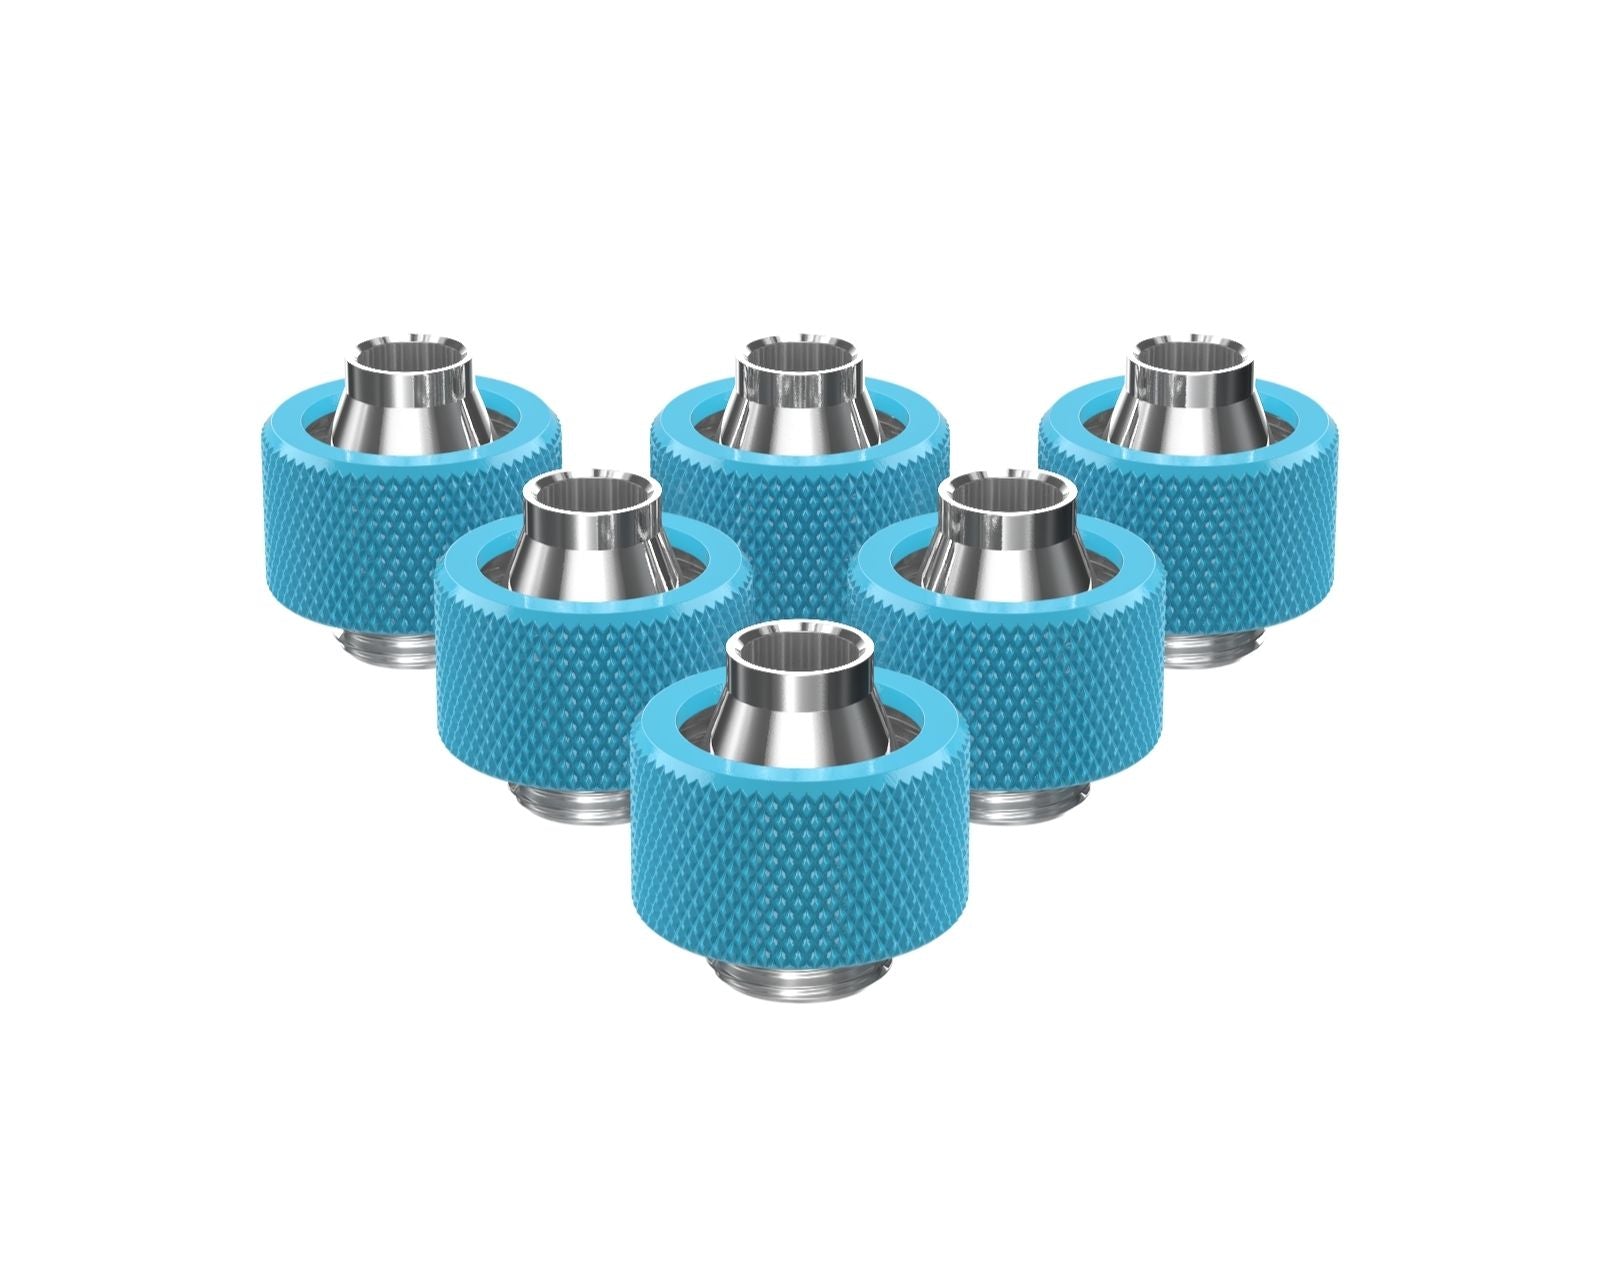 PrimoChill SecureFit SX - Premium Compression Fitting For 3/8in ID x 5/8in OD Flexible Tubing 6 Pack (F-SFSX58-6) - Available in 20+ Colors, Custom Watercooling Loop Ready - Sky Blue